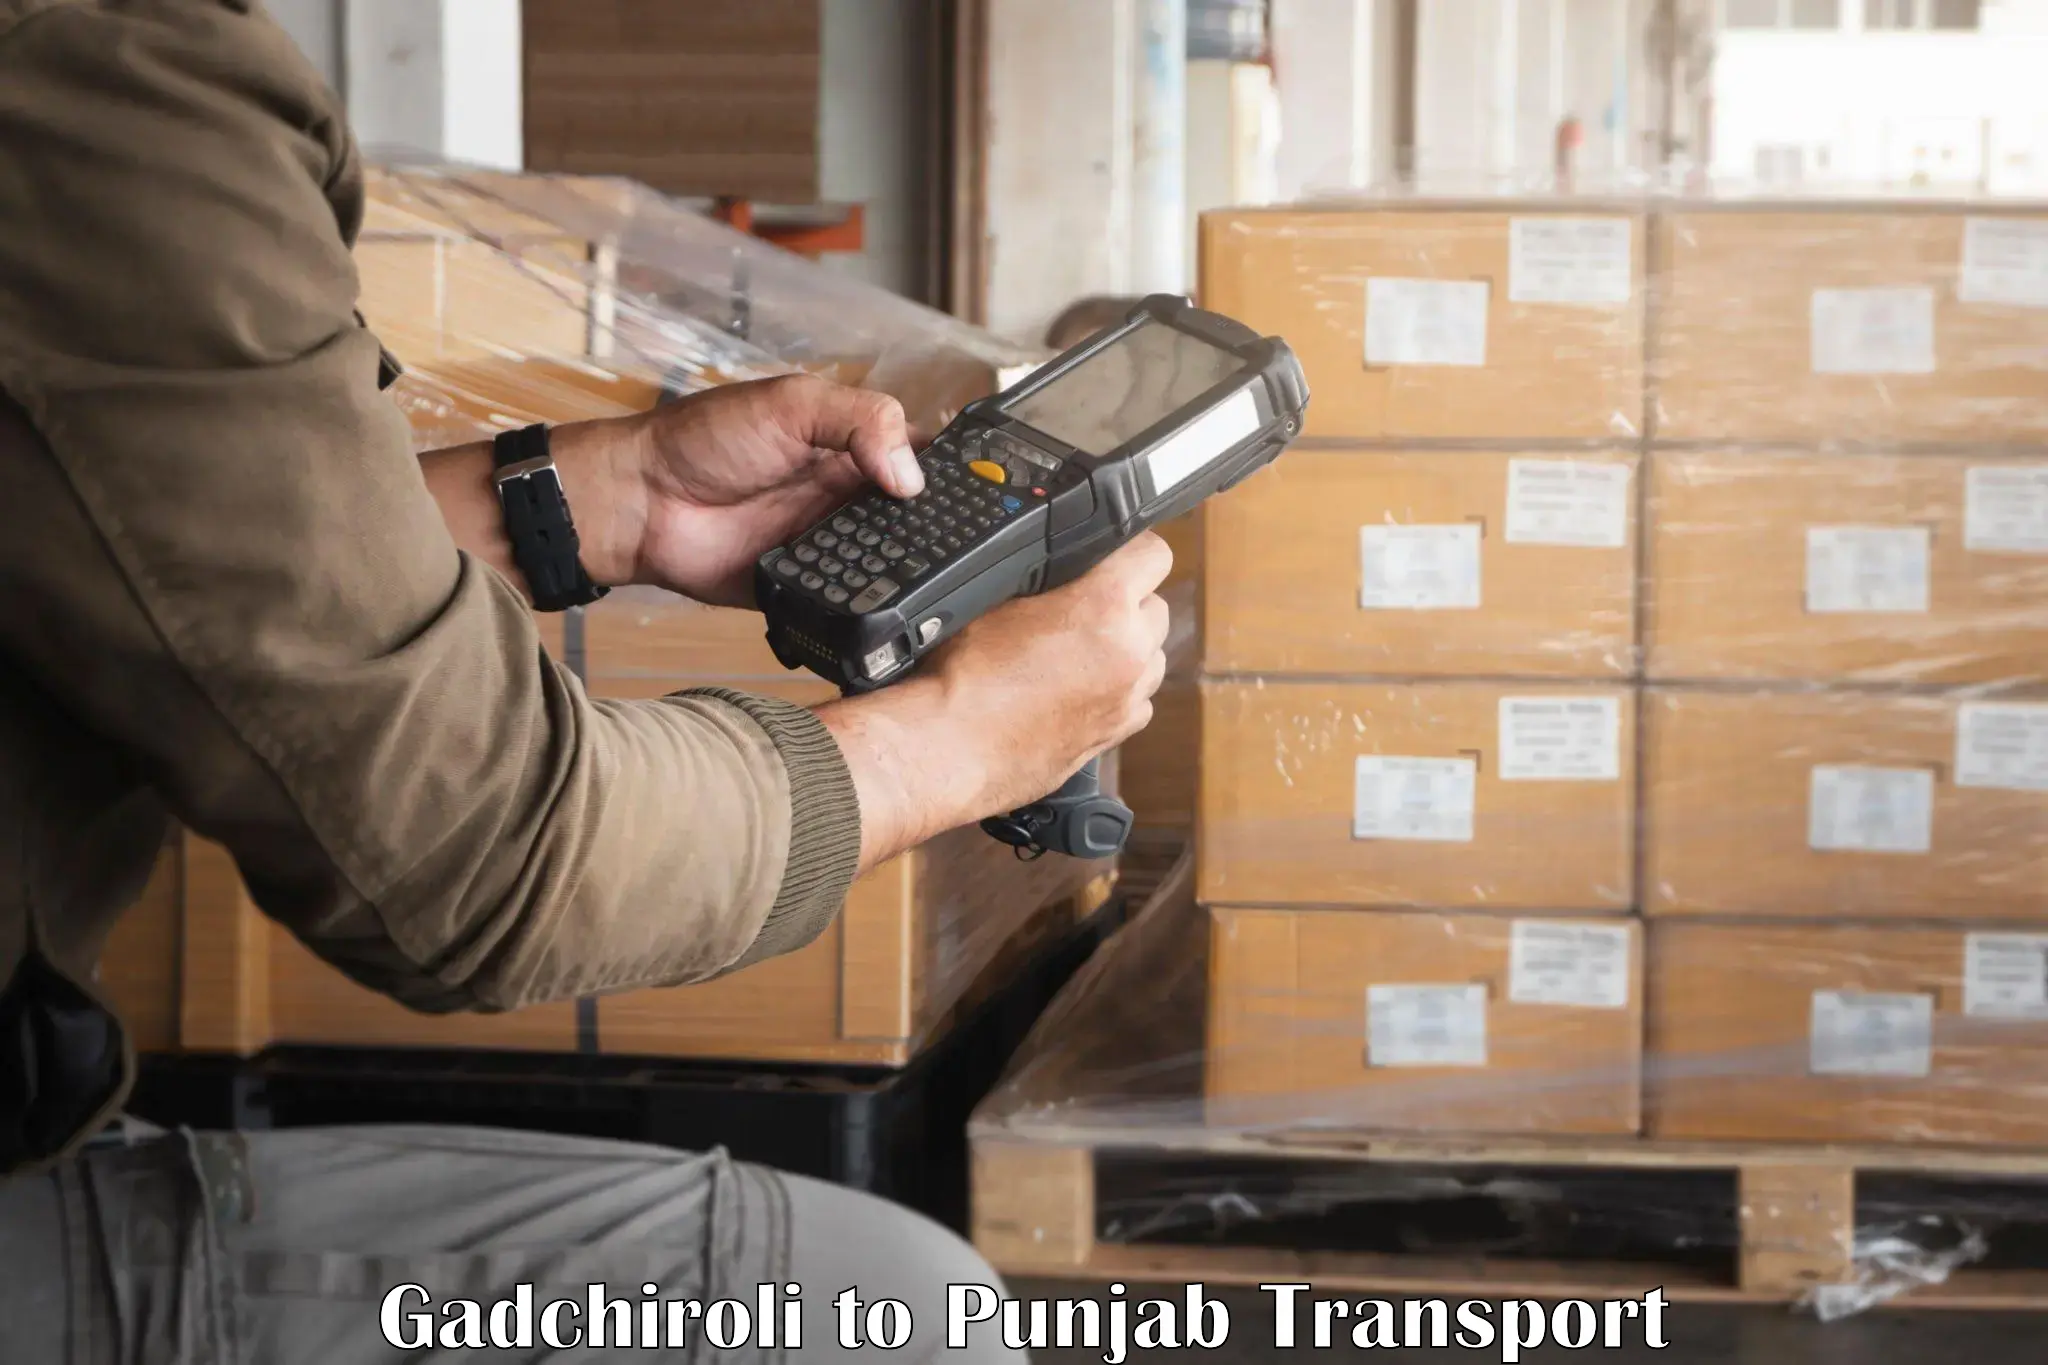 Package delivery services Gadchiroli to Punjab